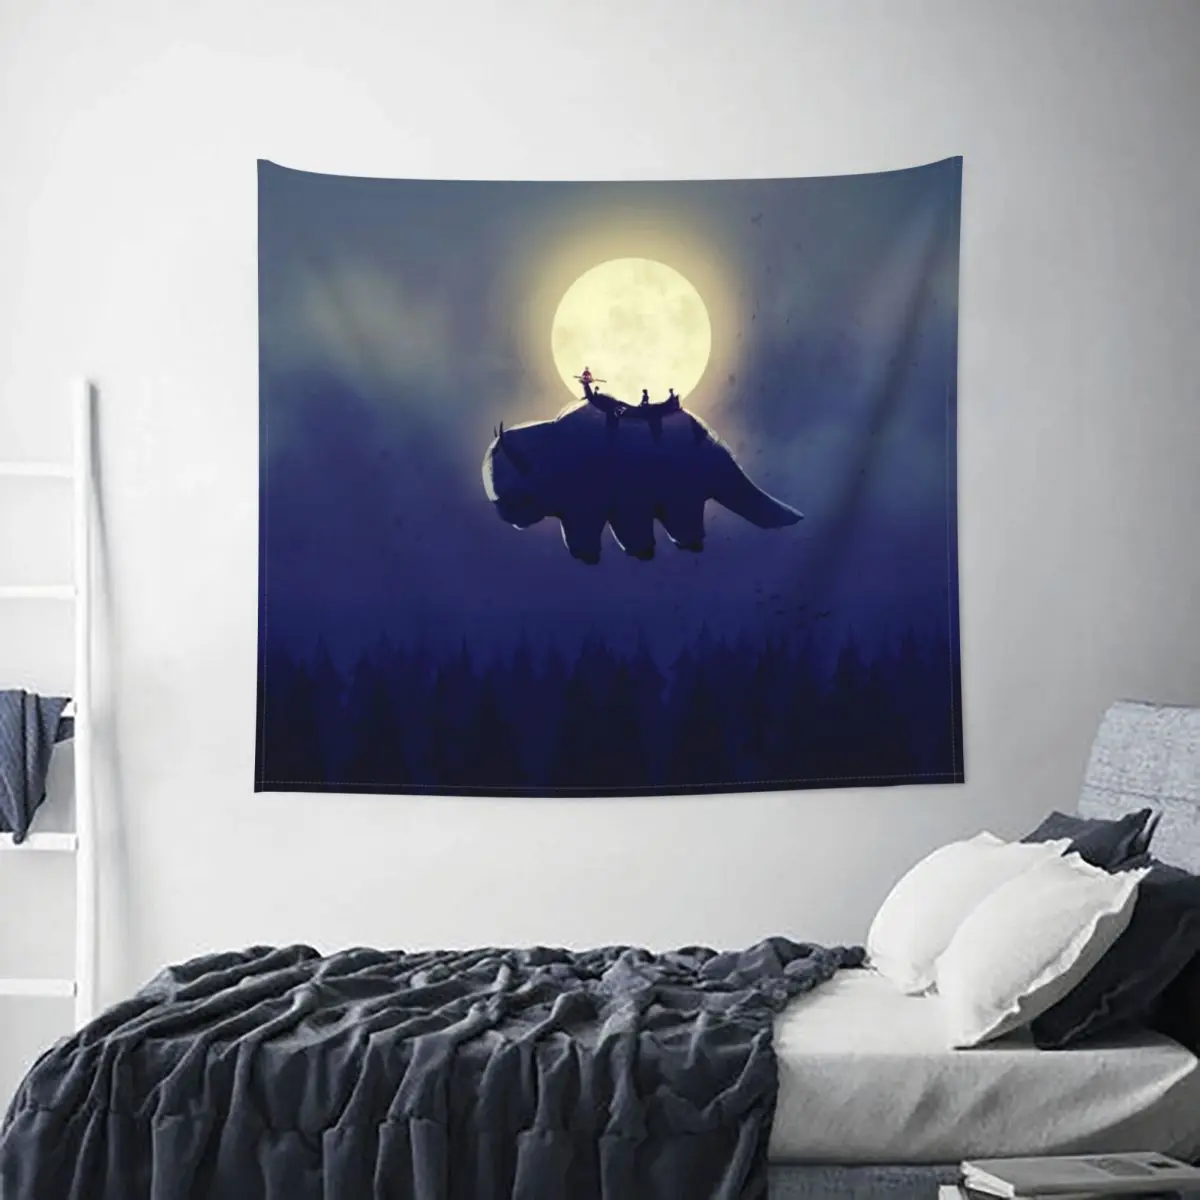 Avatar The Last Airbender Tapestry Colorful Polyester Wall Hanging Appa Room Decoration Yoga Mat Retro Tapestries - Avatar The Last Airbender Store